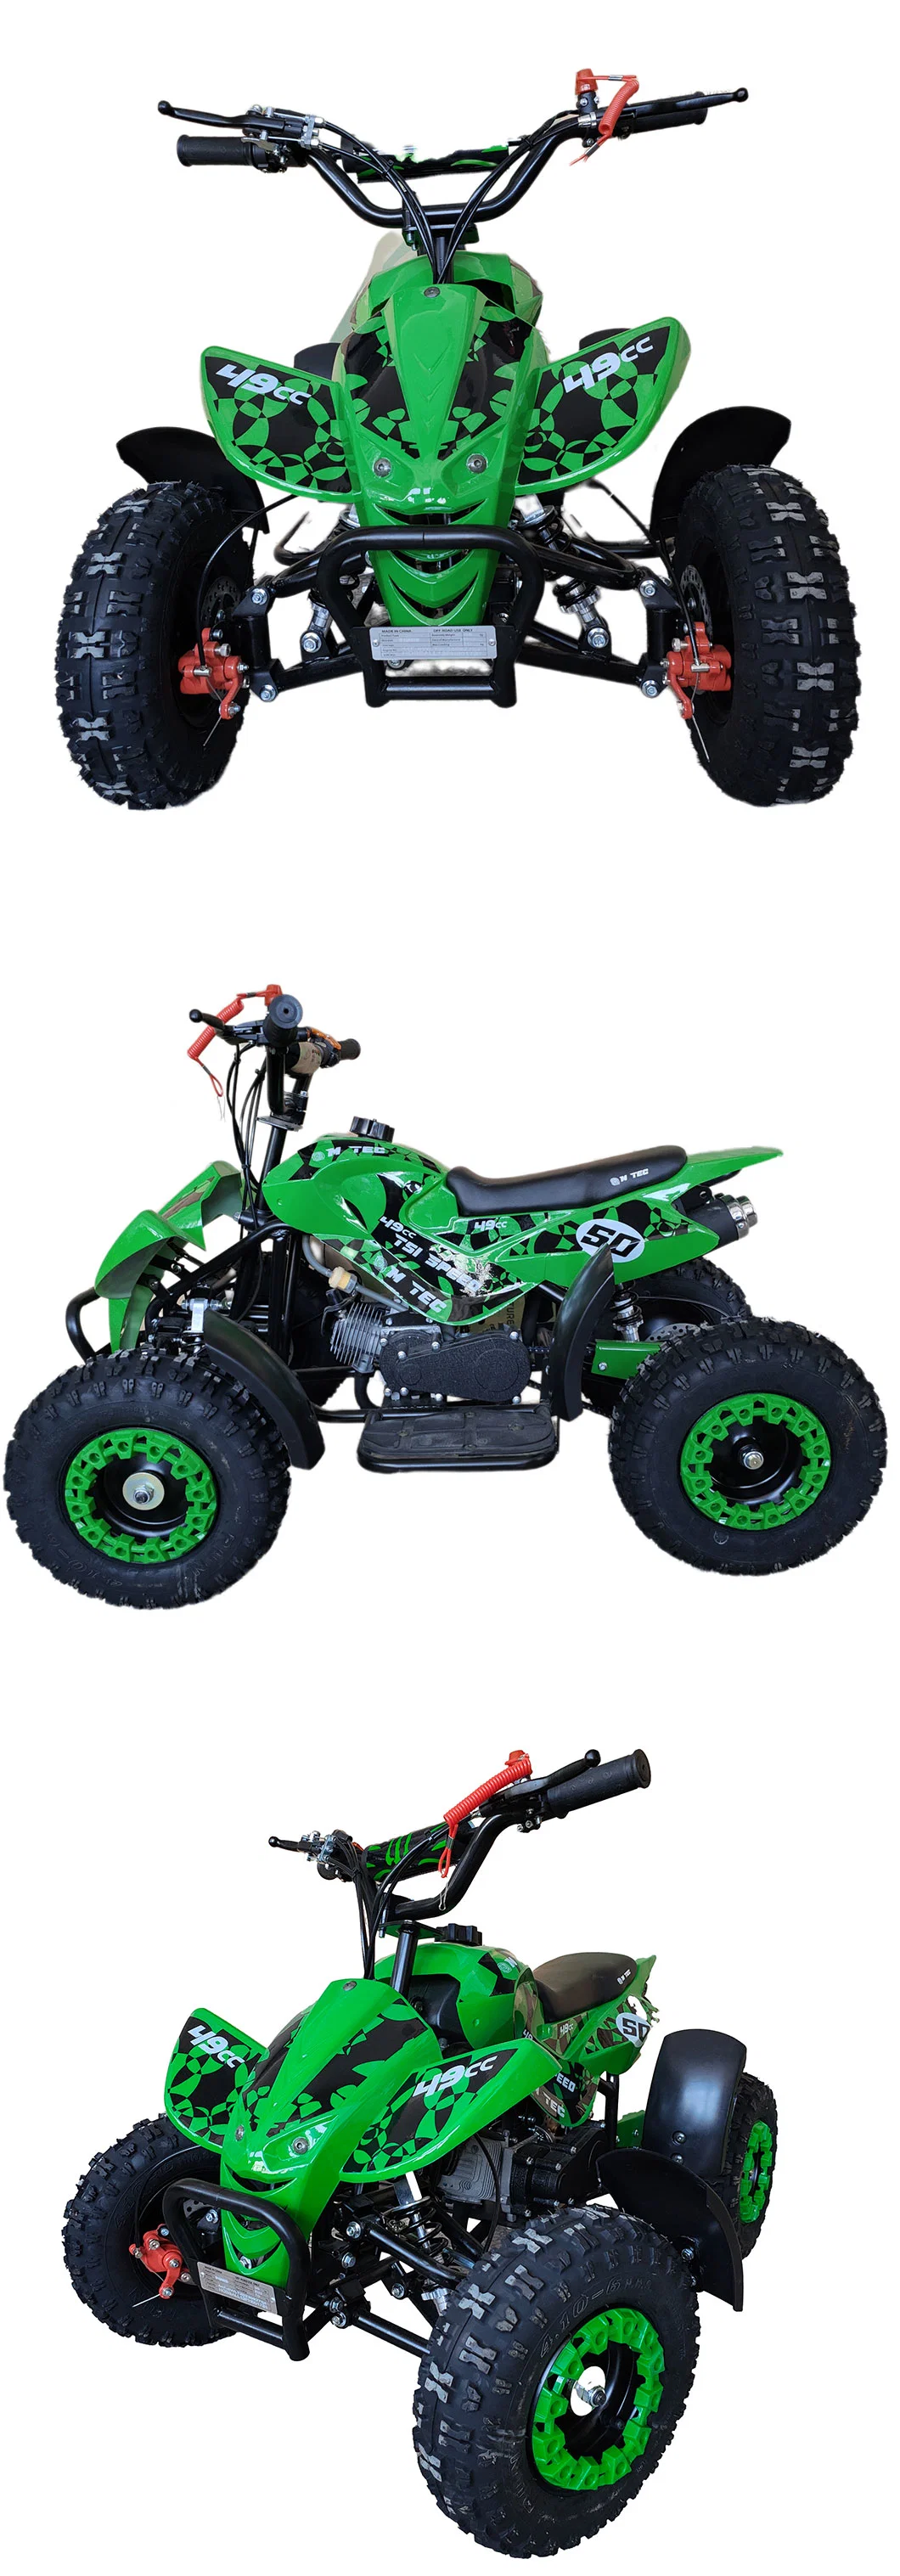 Top Selling Kids ATV with Powerful 49cc Two Stroke Engine